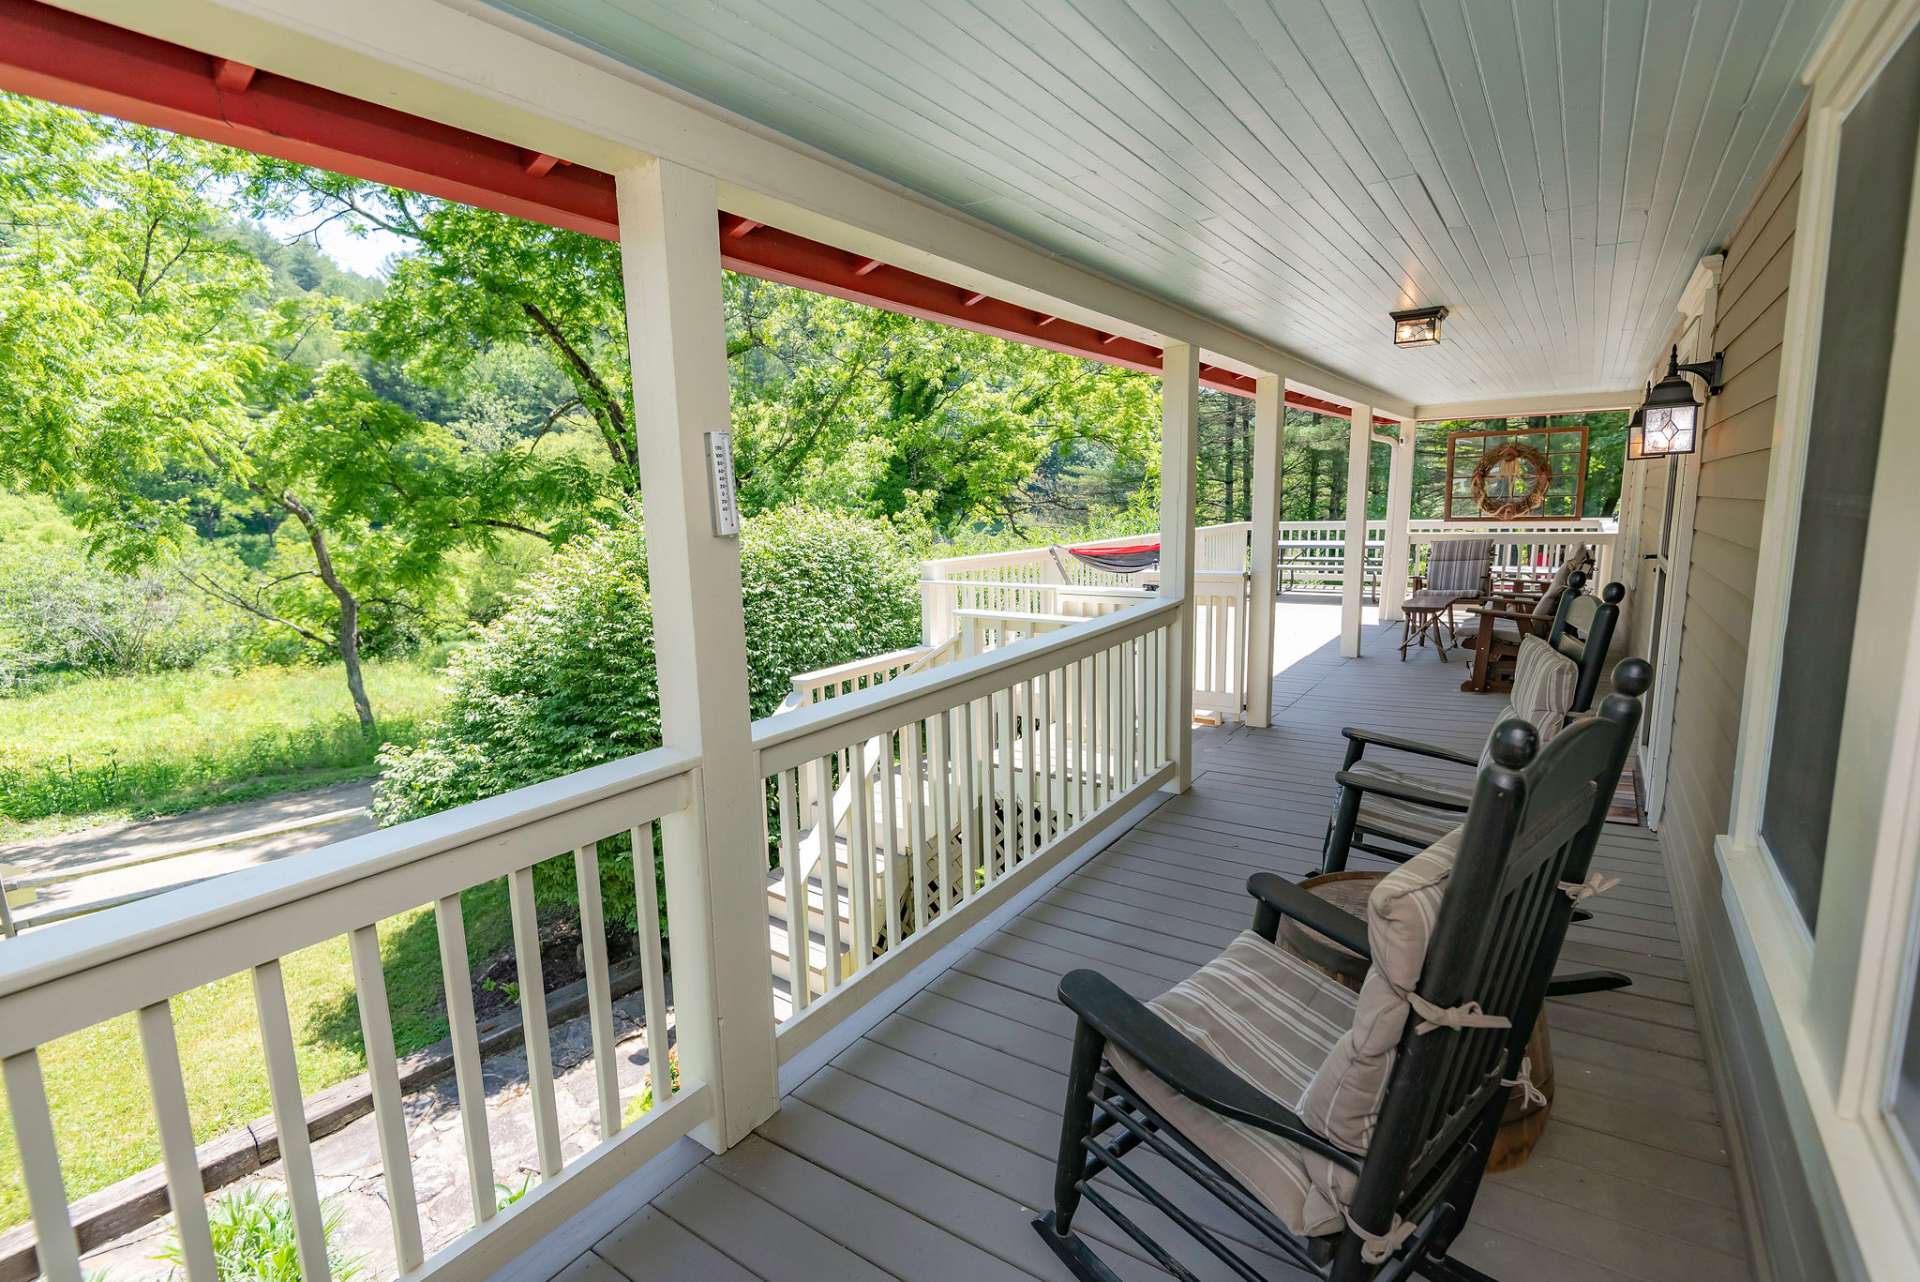 No farmhouse is complete without the rocking chair front porch... this one won't disappoint & includes a lovely view of the New River just across the road.